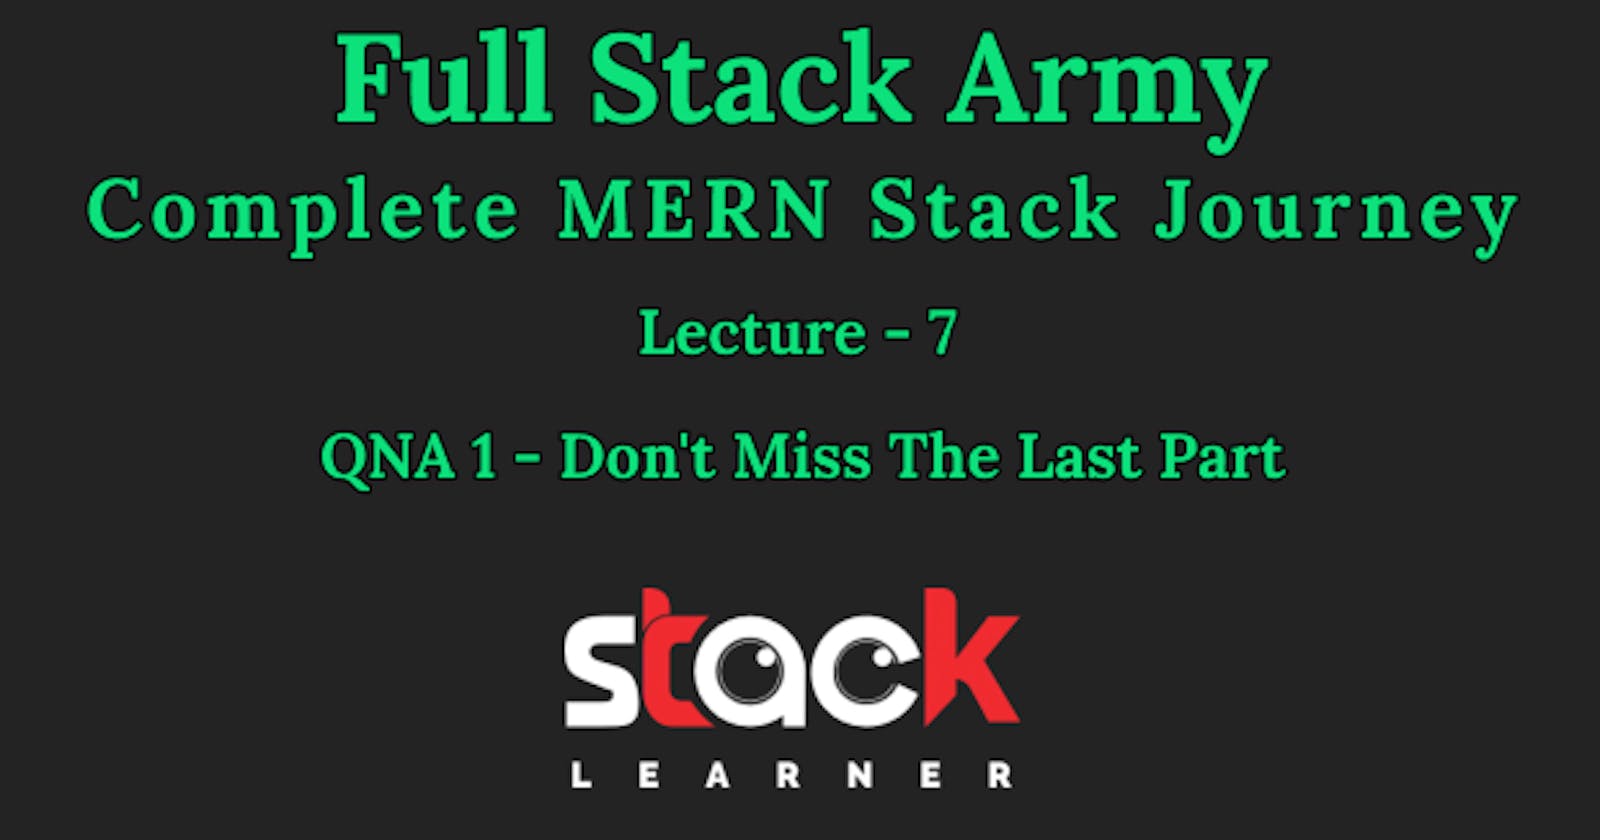 Lecture 7 - QNA 1 - Don't Miss The Last Part | Full Stack Army